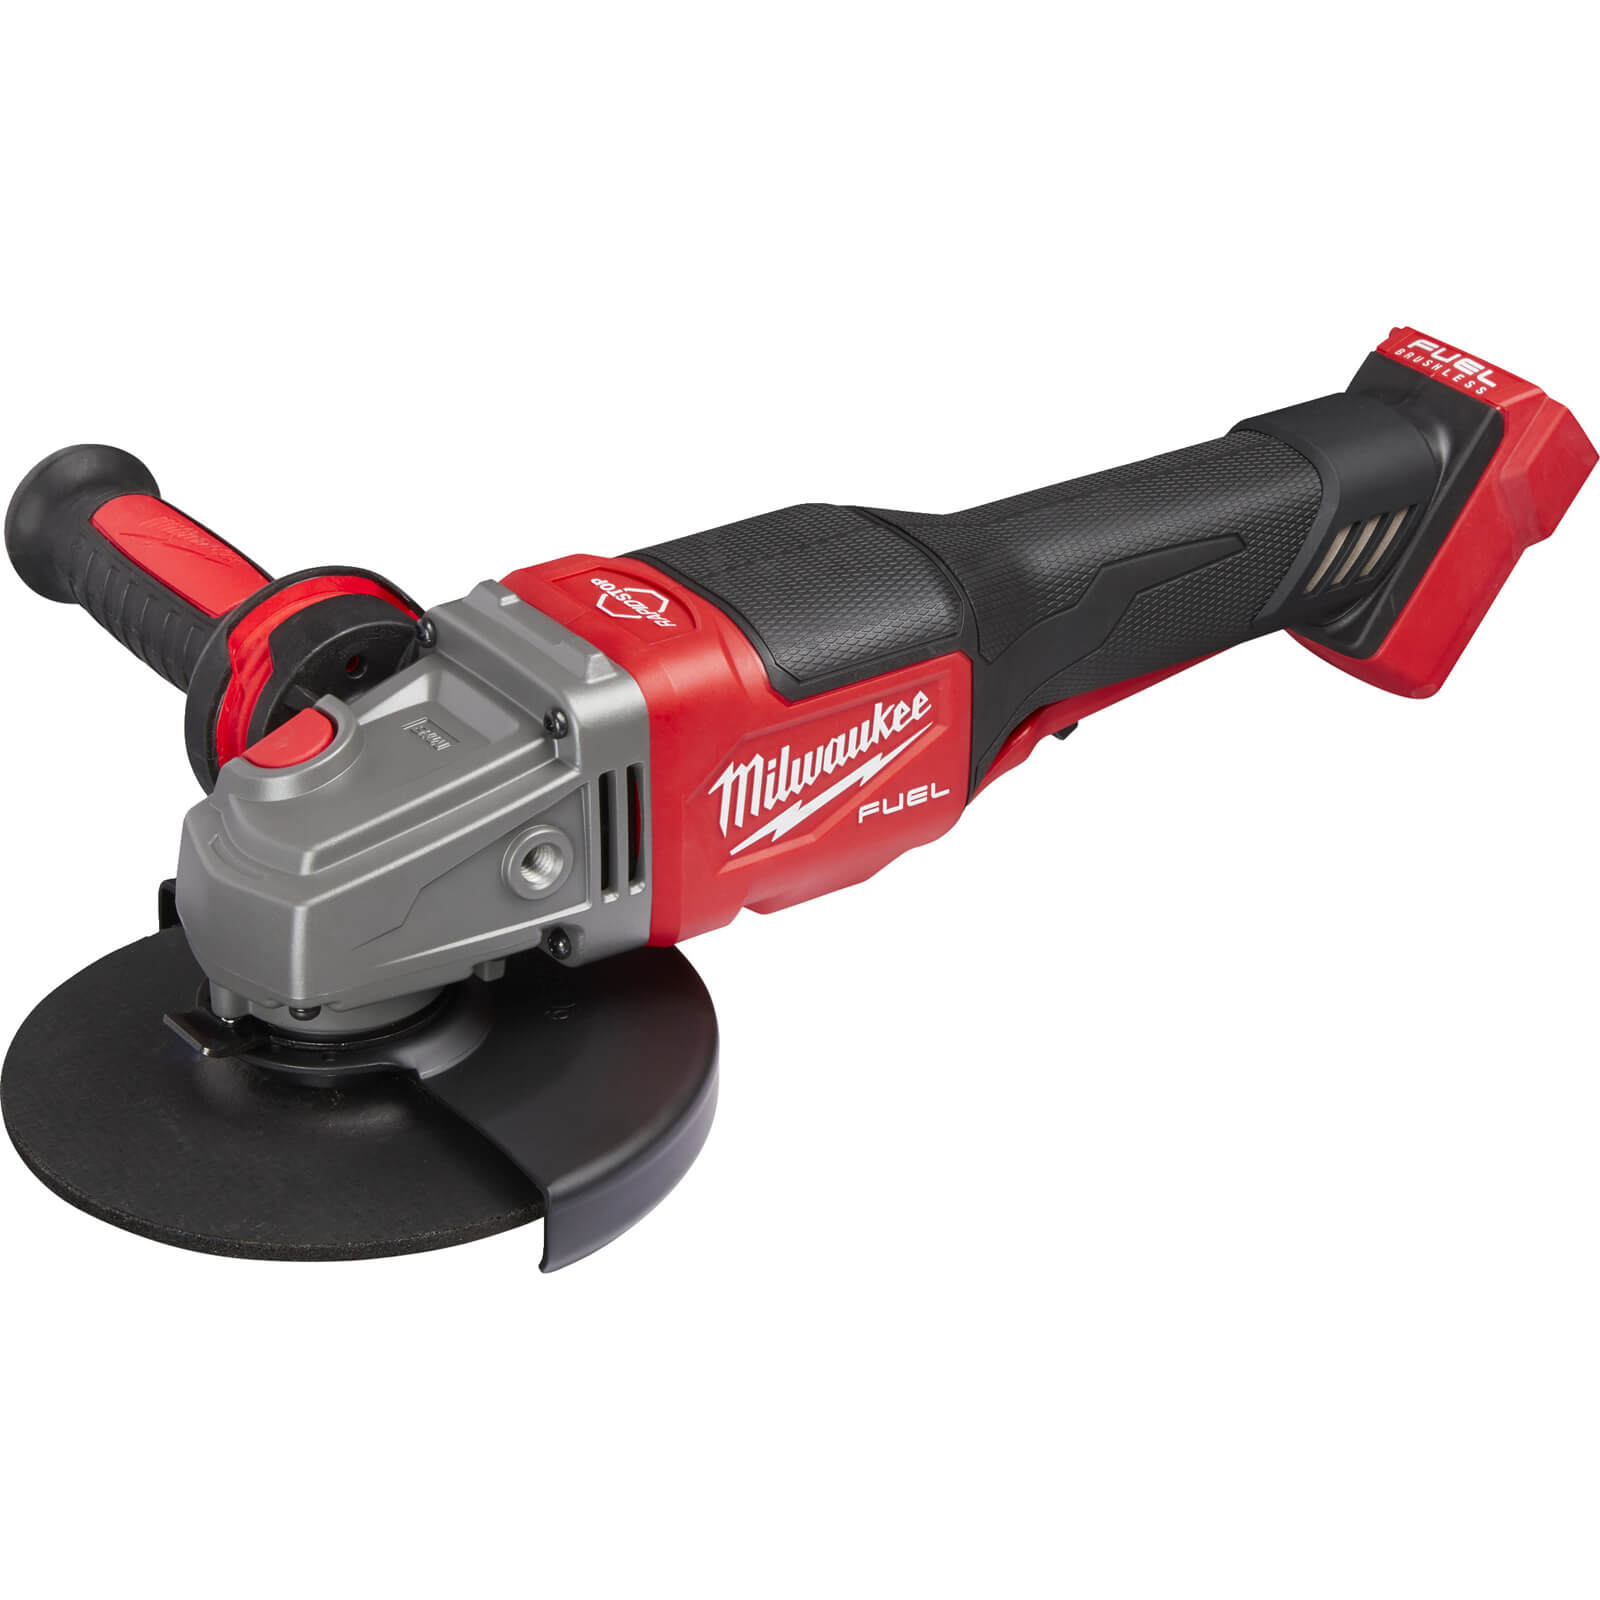 Milwaukee M18 FHSAG125XPDB Fuel 18v Cordless Brushless Angle Grinder 125mm No Batteries No Charger Case